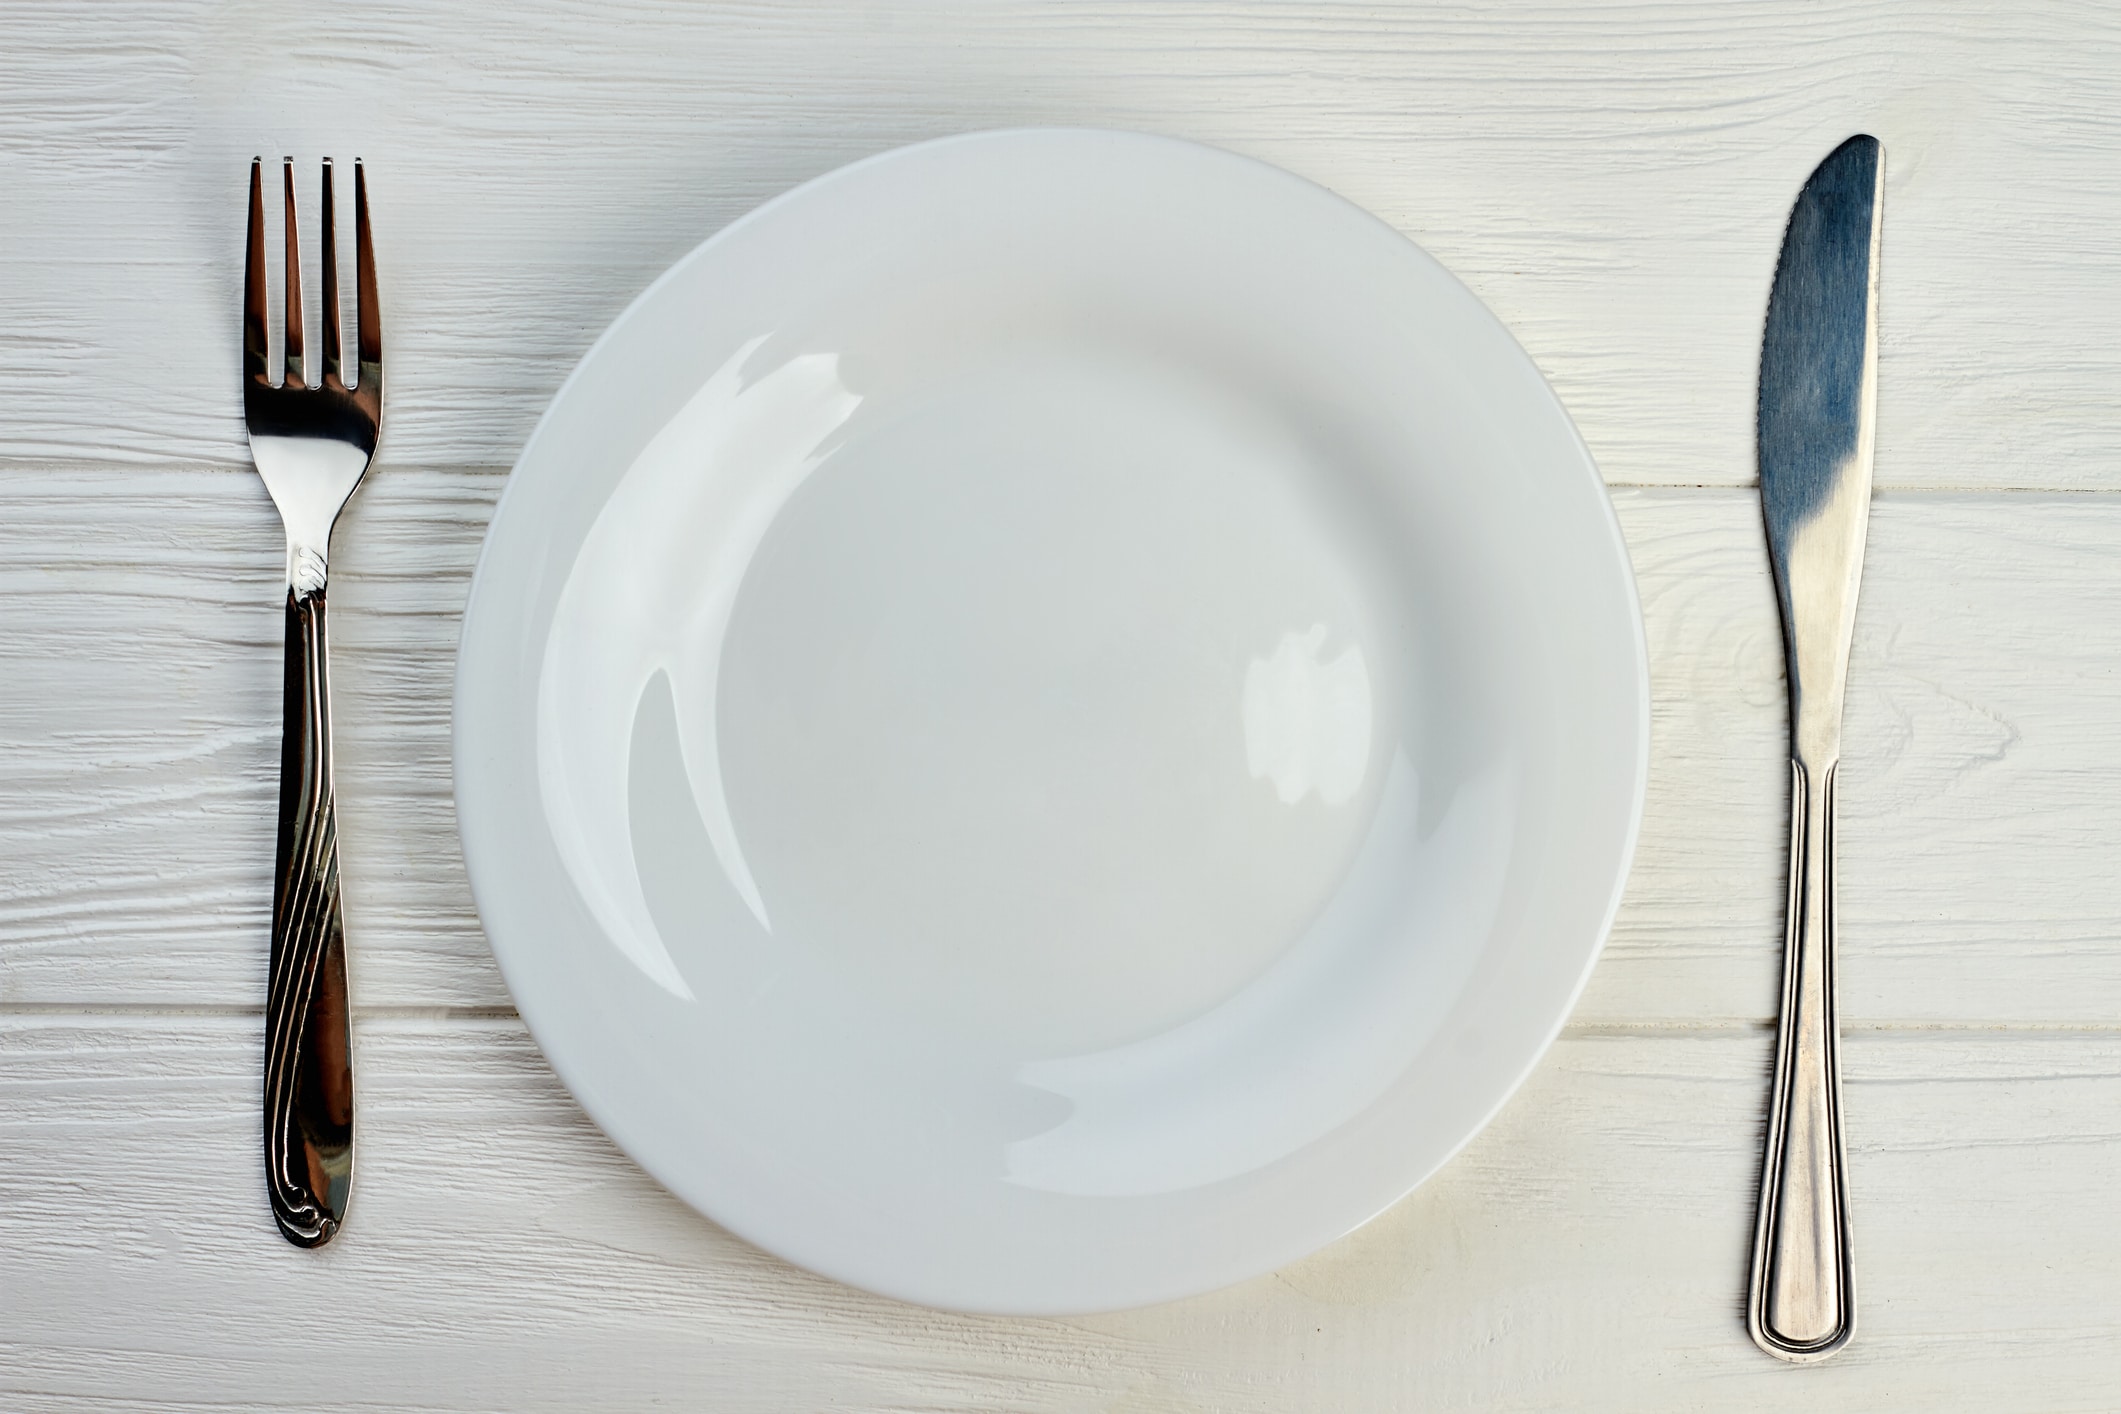 Empty plate, fork and knife.